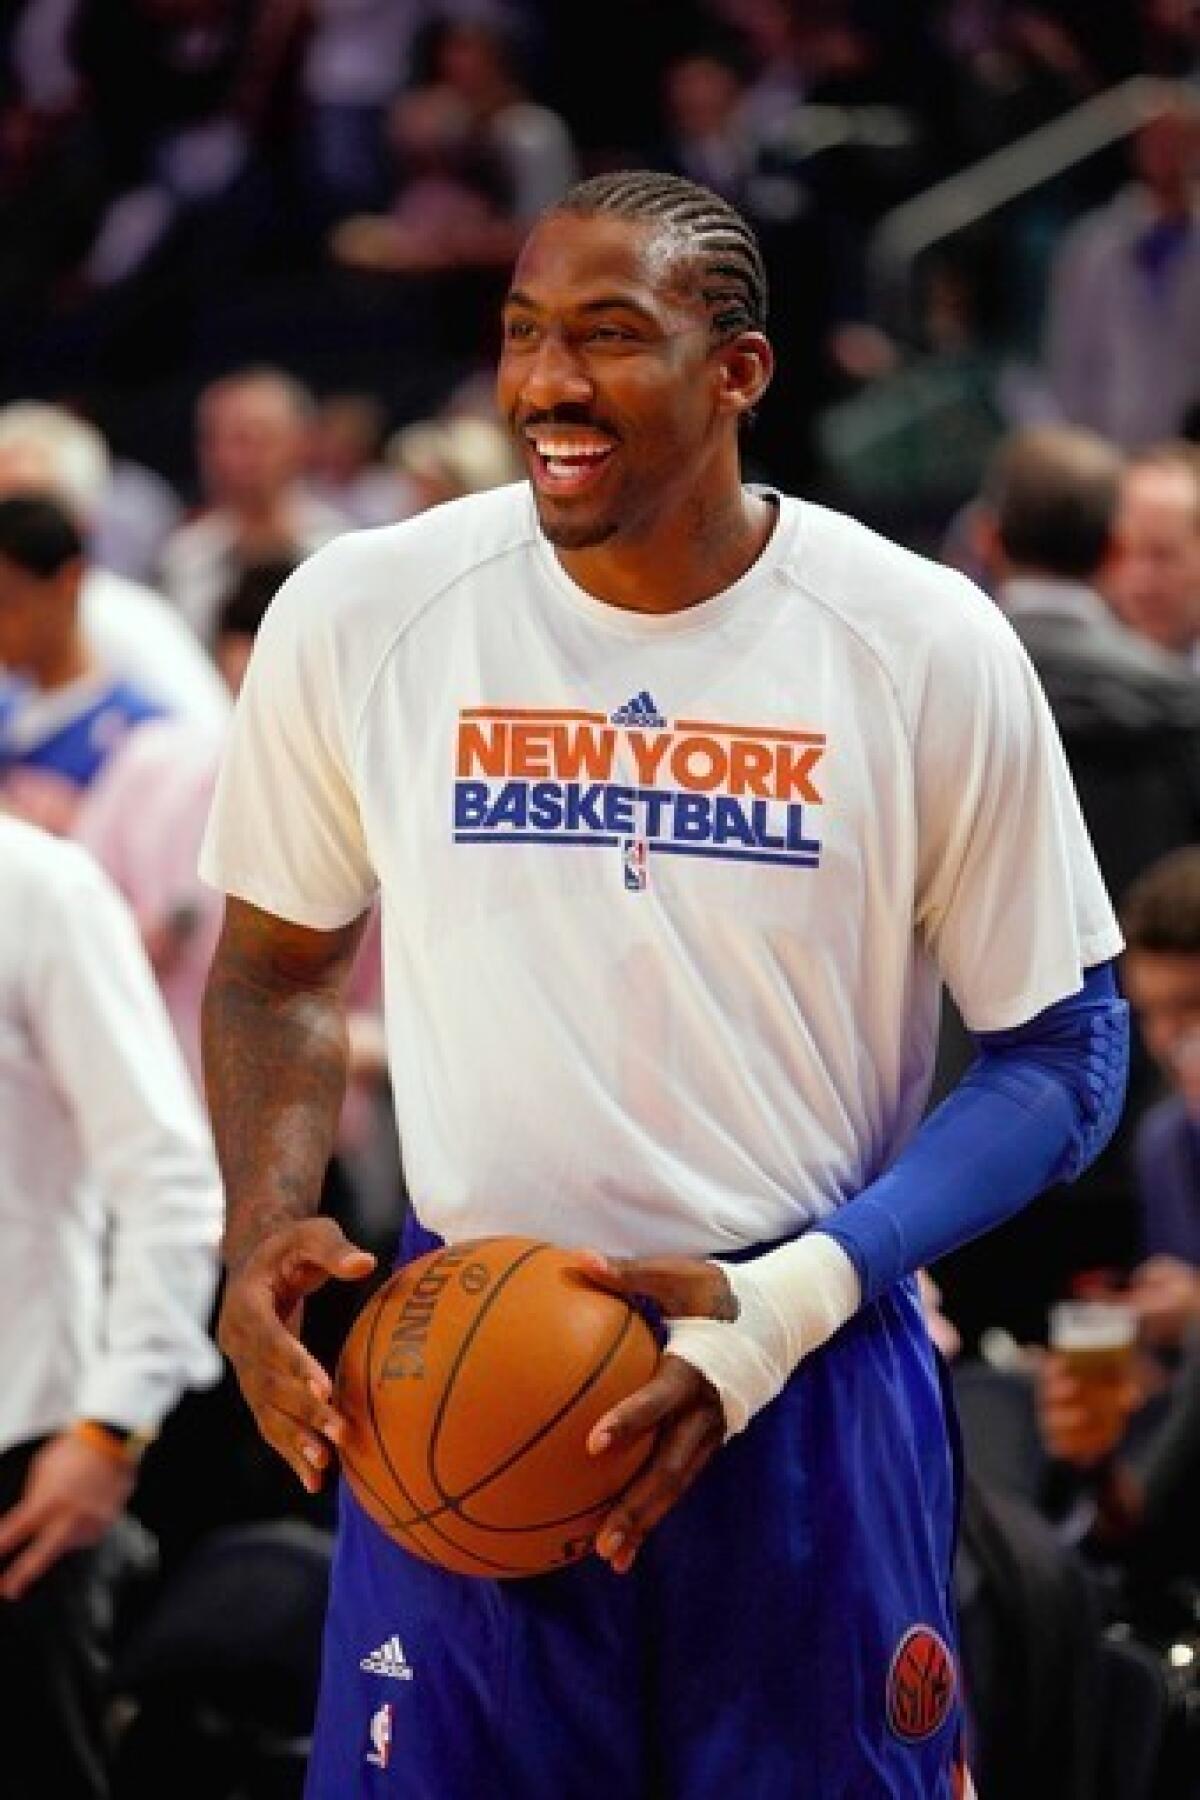 Amar'e Stoudemire of the New York Knicks.